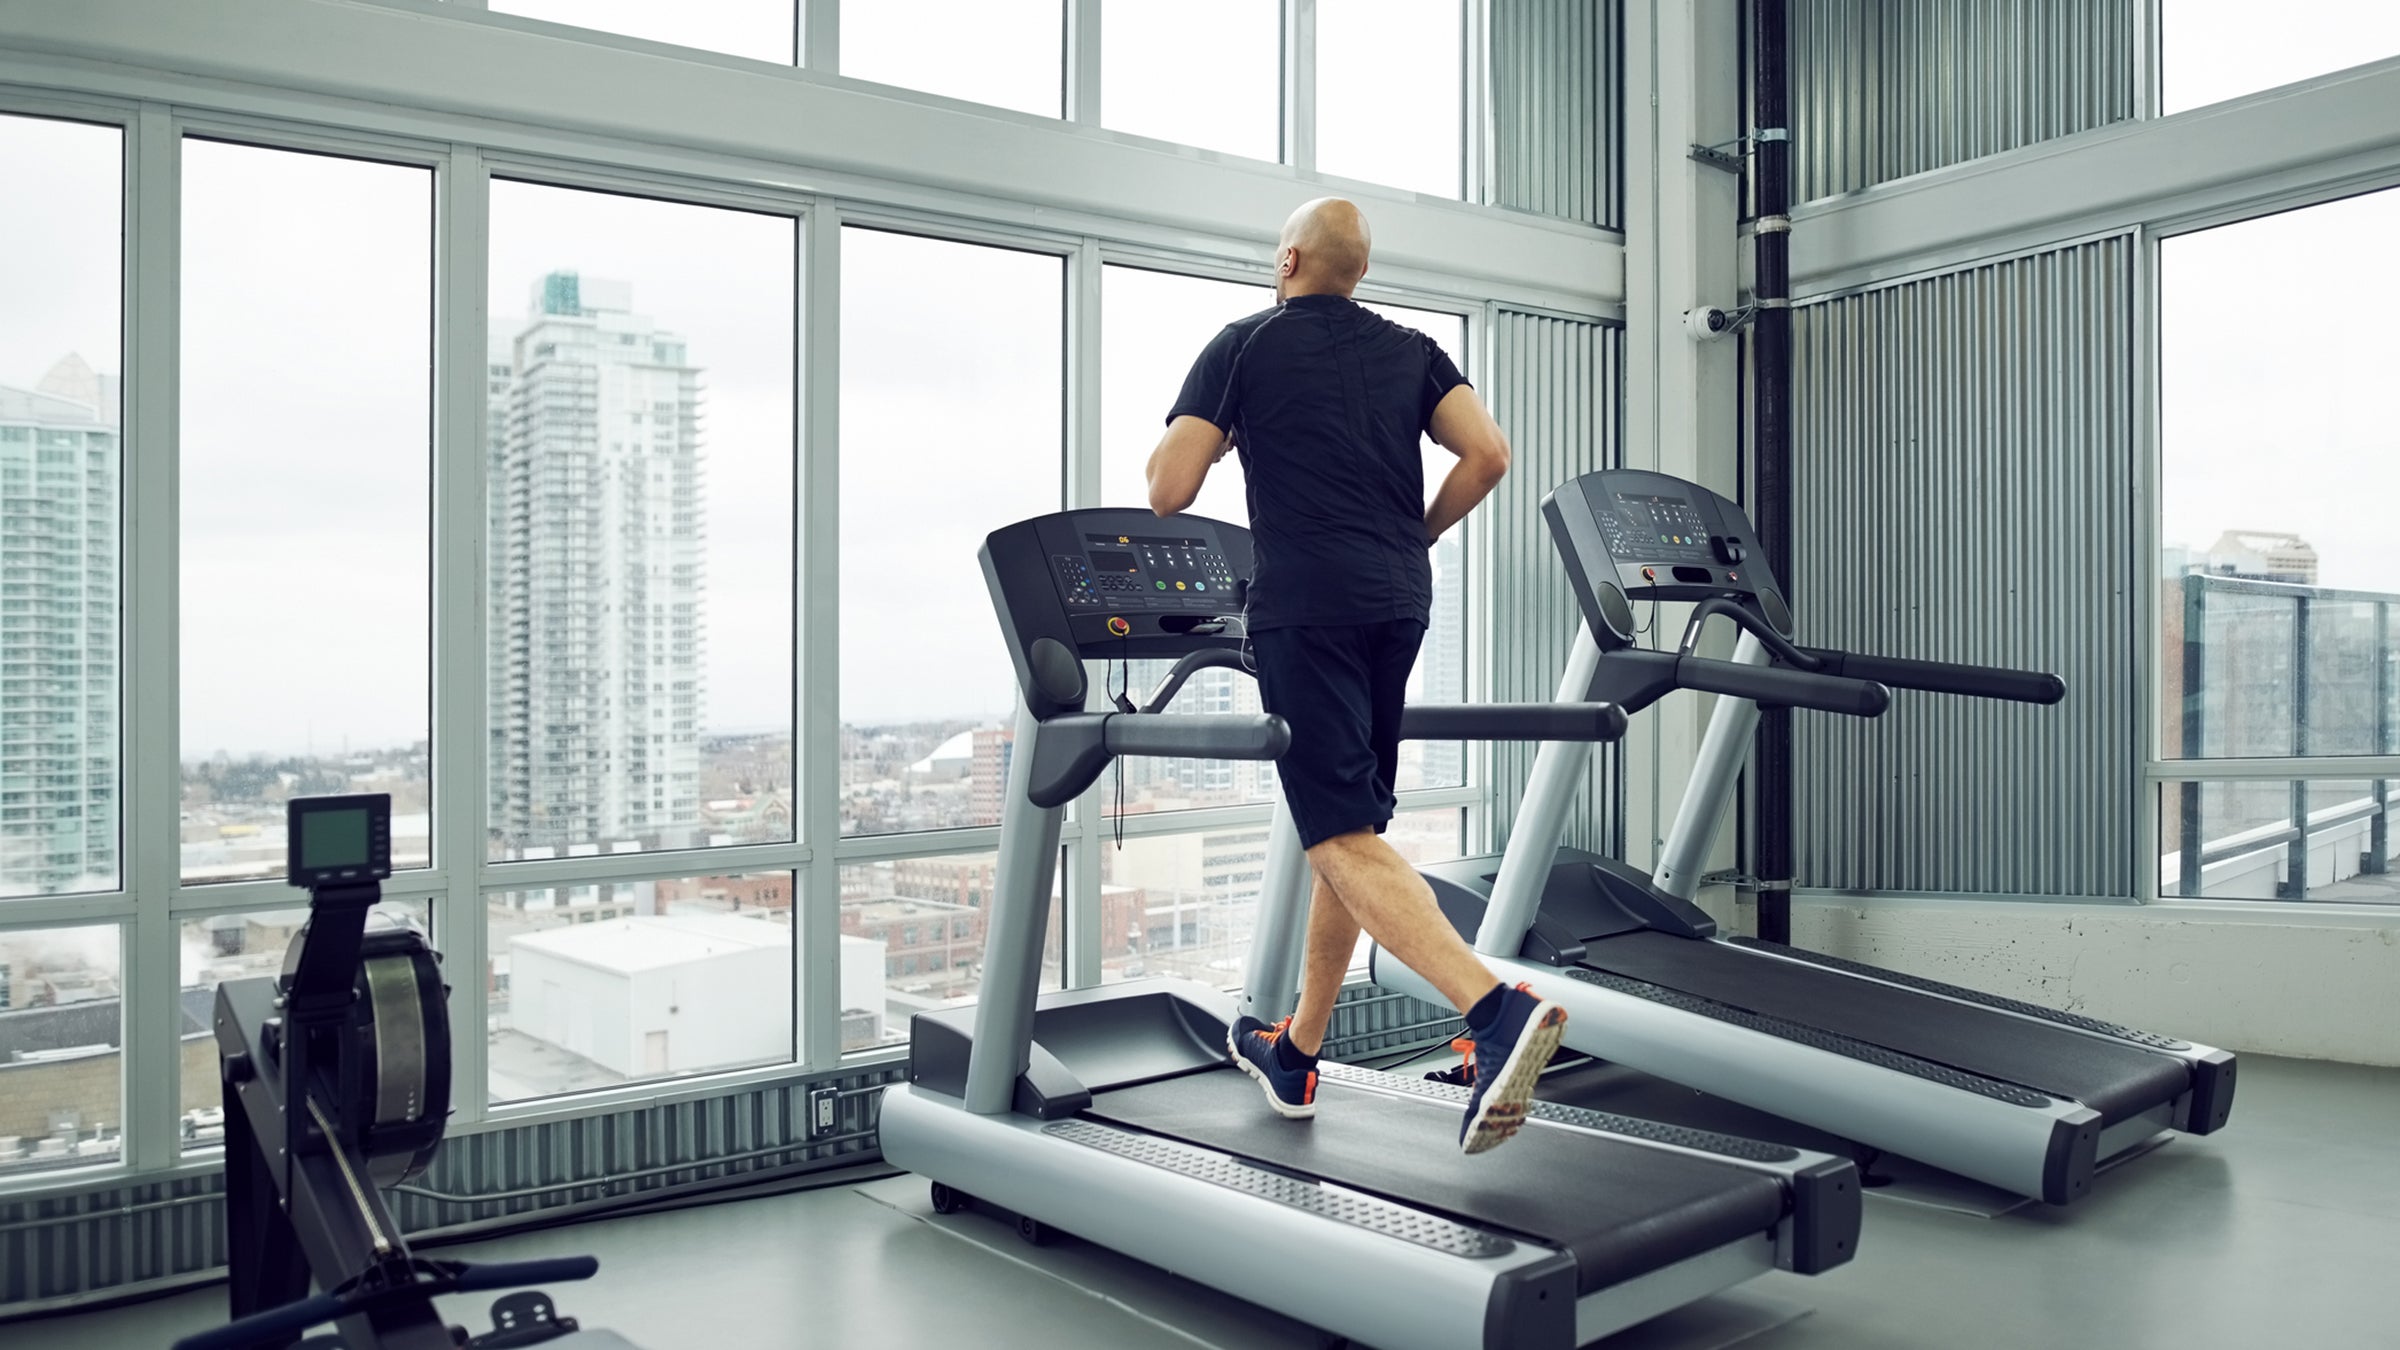 Ask Pete: Do Treadmills Cause Injury? - Outside Online